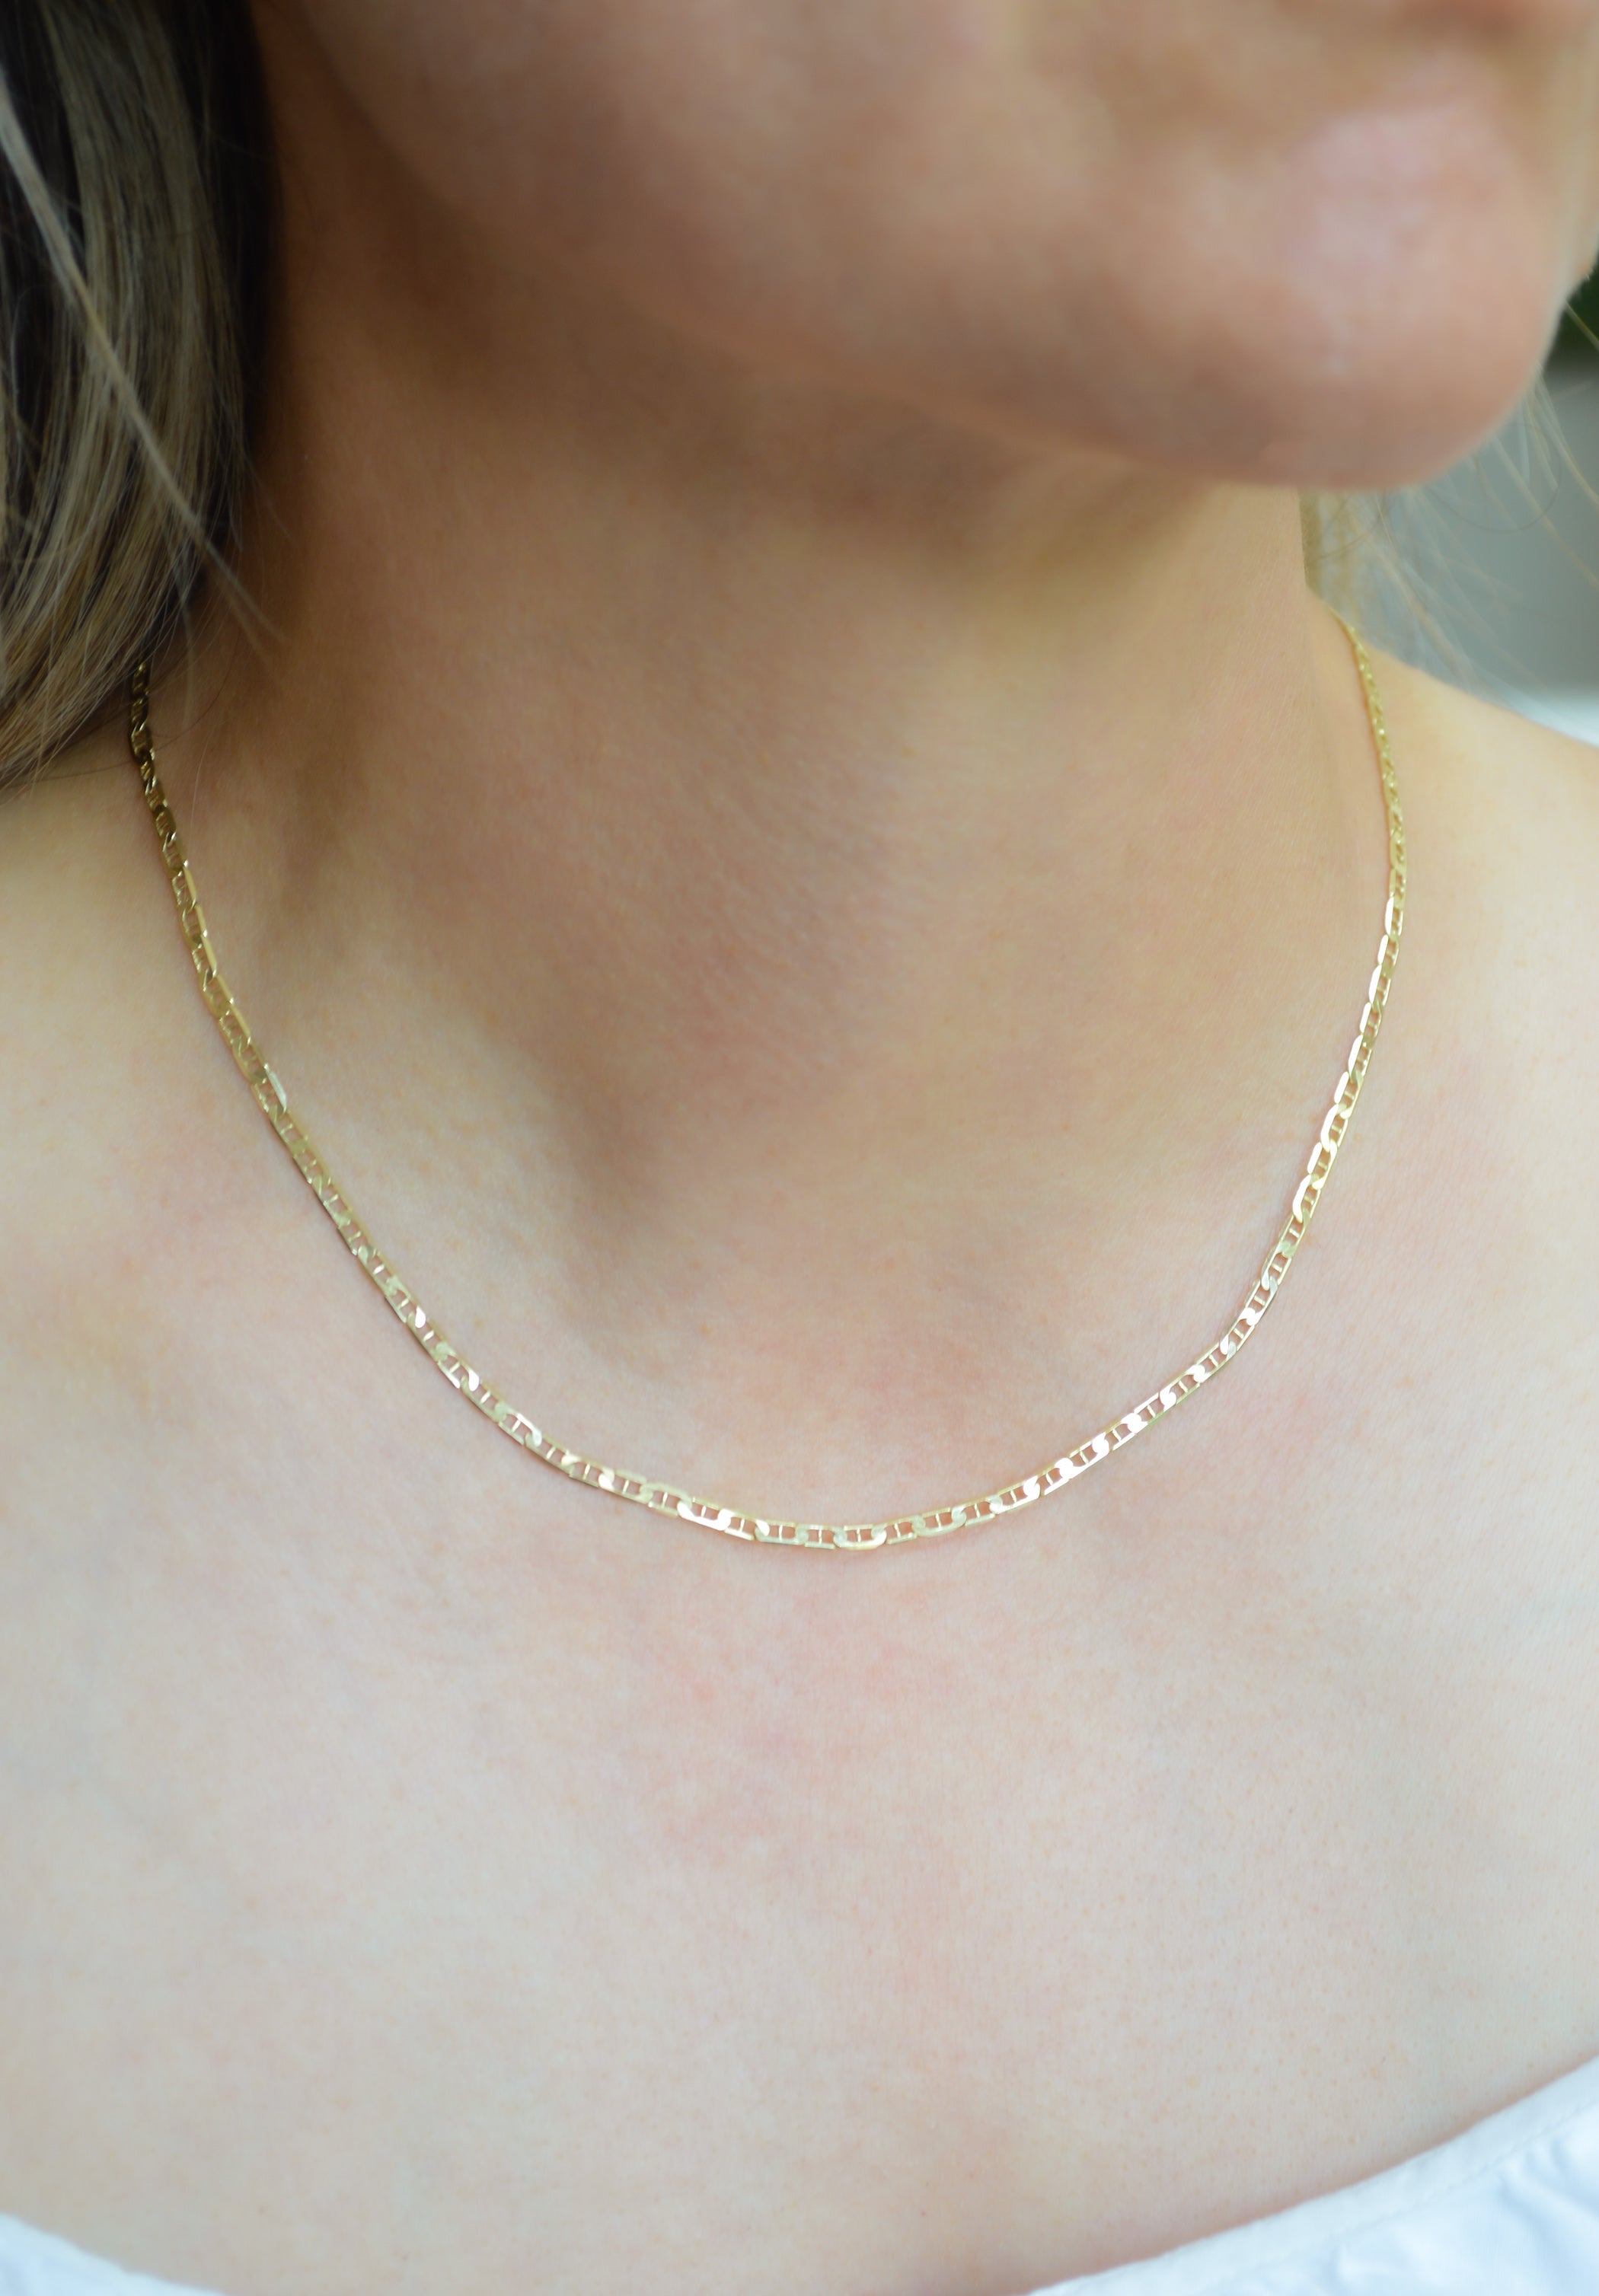 Buy 14K Yellow Gold Mariner Chain, Mariner Chain, Chain Necklace, Gold  Necklace, Gold Necklace, 18 Inches Chain, Princess Length Necklace 1.2  Grams at ShopLC.